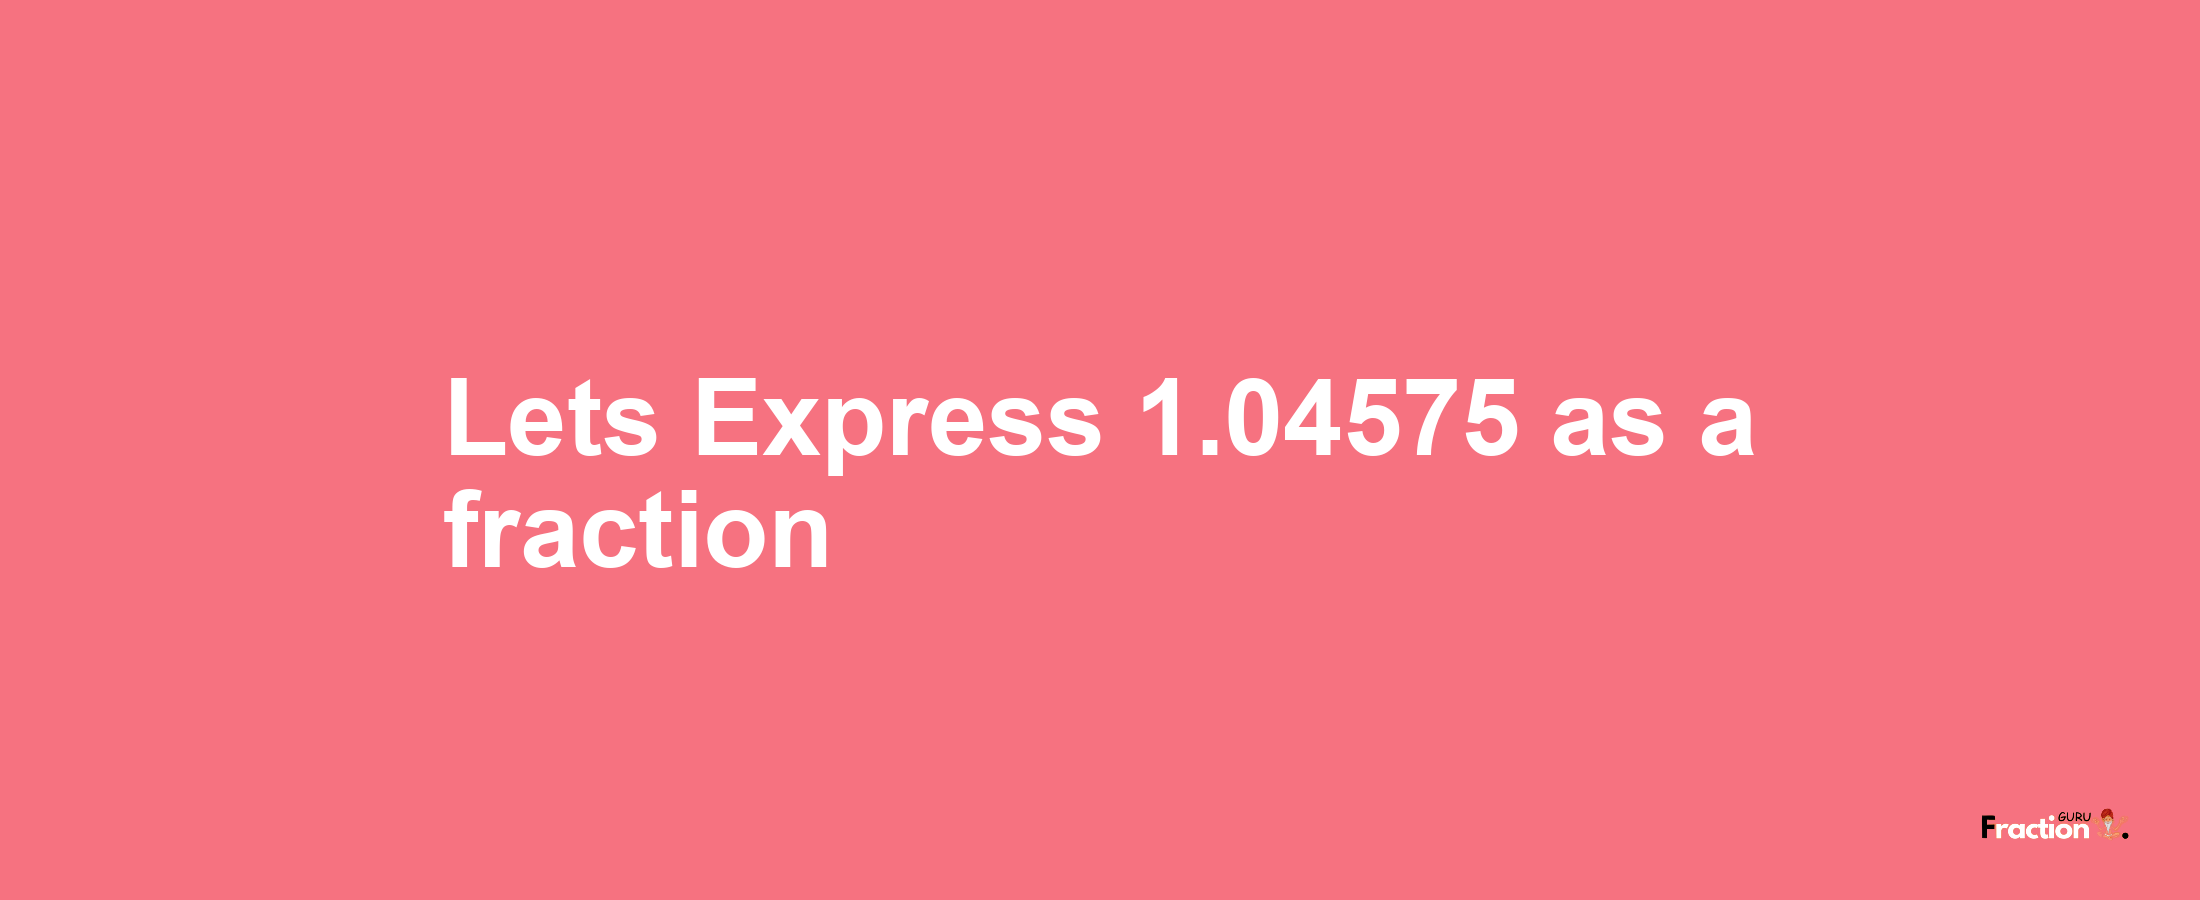 Lets Express 1.04575 as afraction